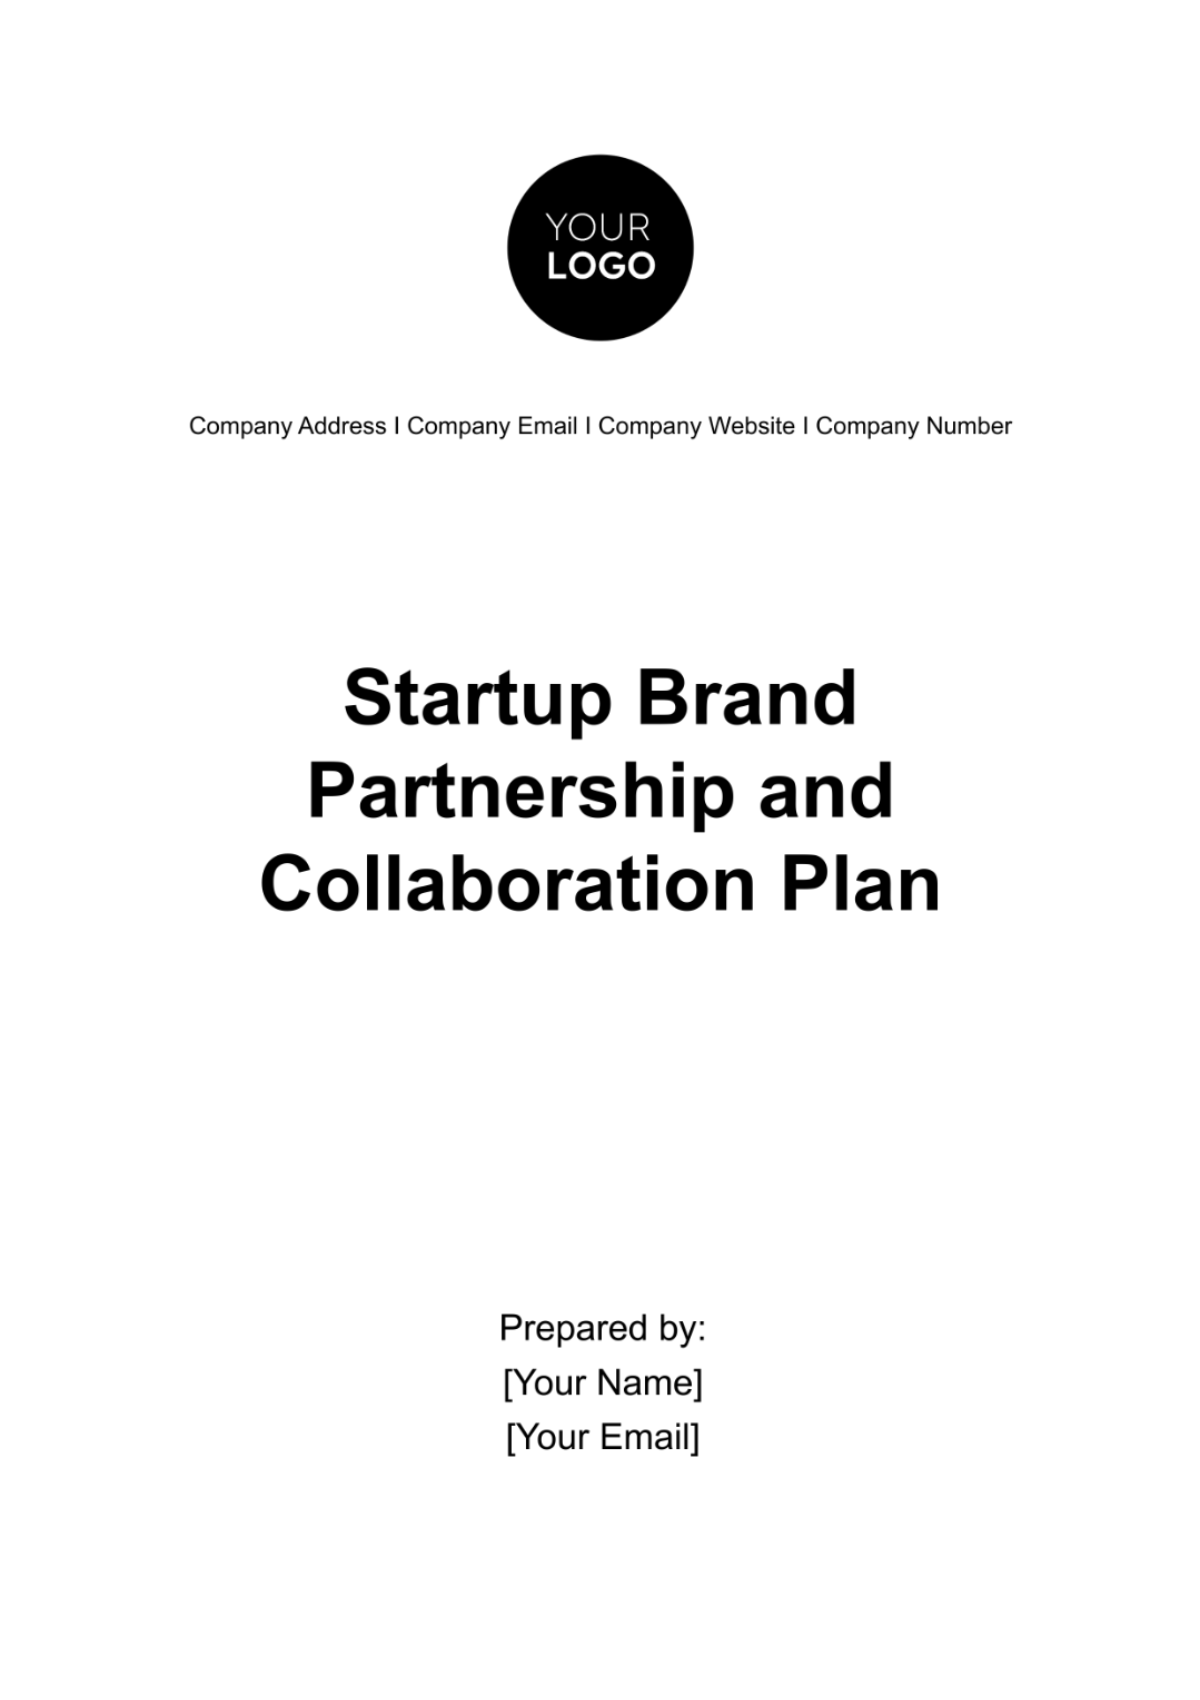 Startup Brand Partnership and Collaboration Plan Template